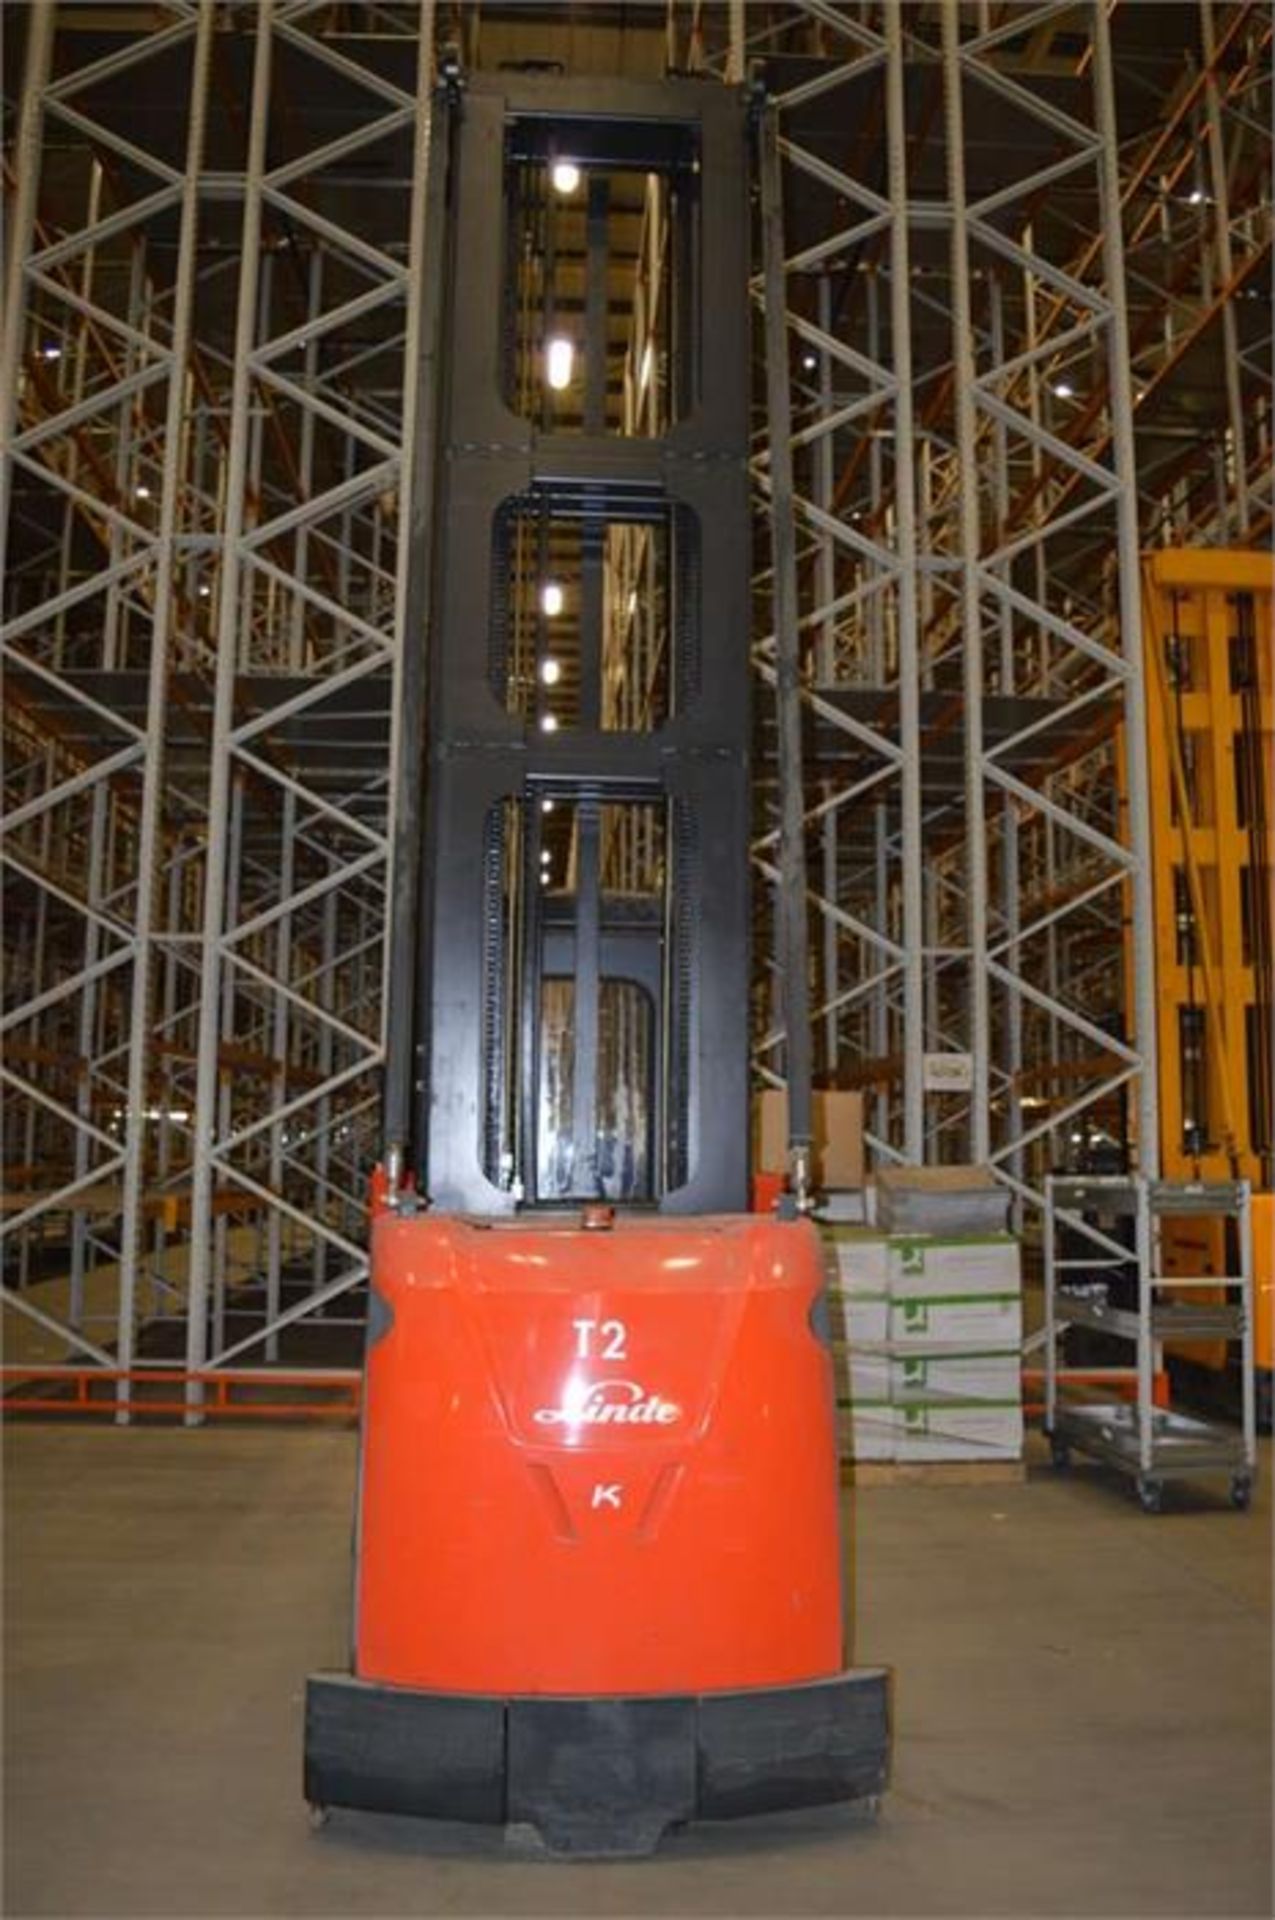 2010 Linde Electric Fork Lift Truck – Type K 1250kg Very narrow aisle electric high level order - Image 6 of 7